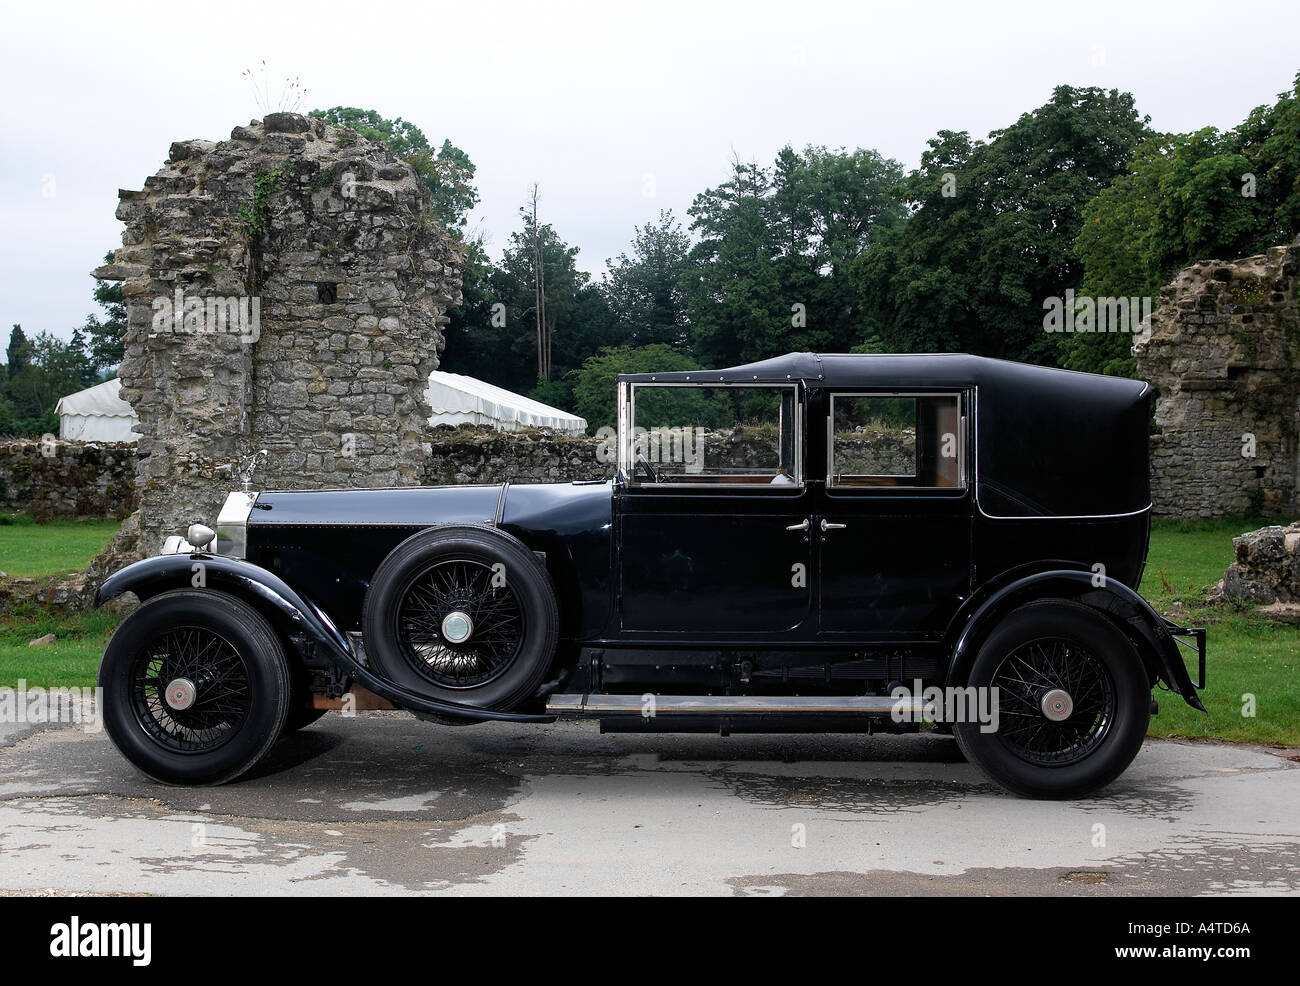 1924 Rolls Royce Silver Ghost 40-50 hp formerly owned by Charlie Chaplin Stock Photo